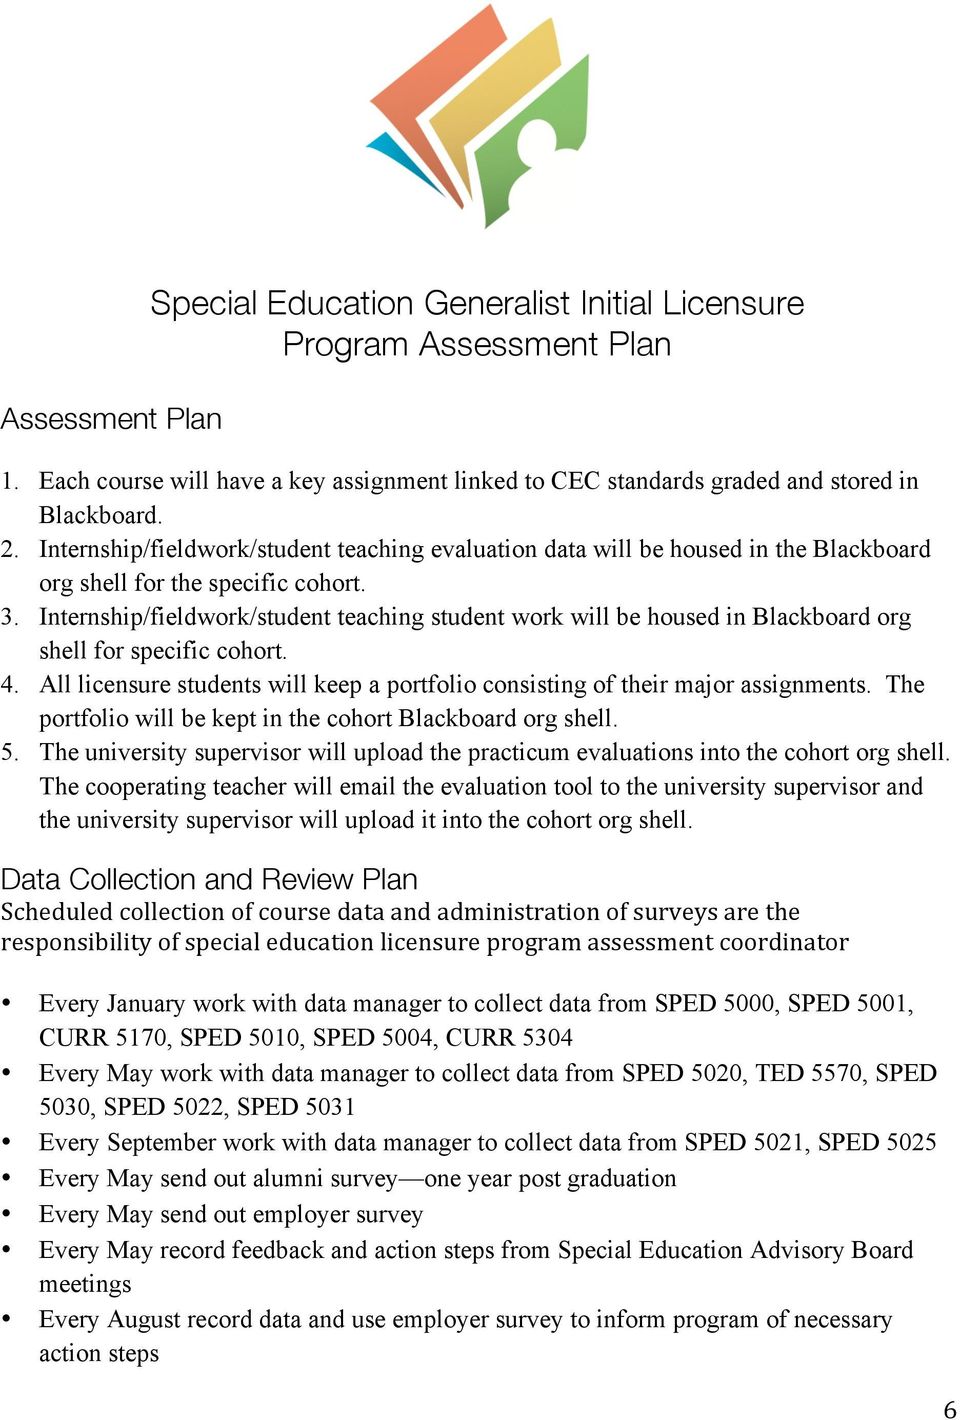 Internship/fieldwork/student teaching student work will be housed in Blackboard org shell for specific cohort. 4. All licensure students will keep a portfolio consisting of their major assignments.